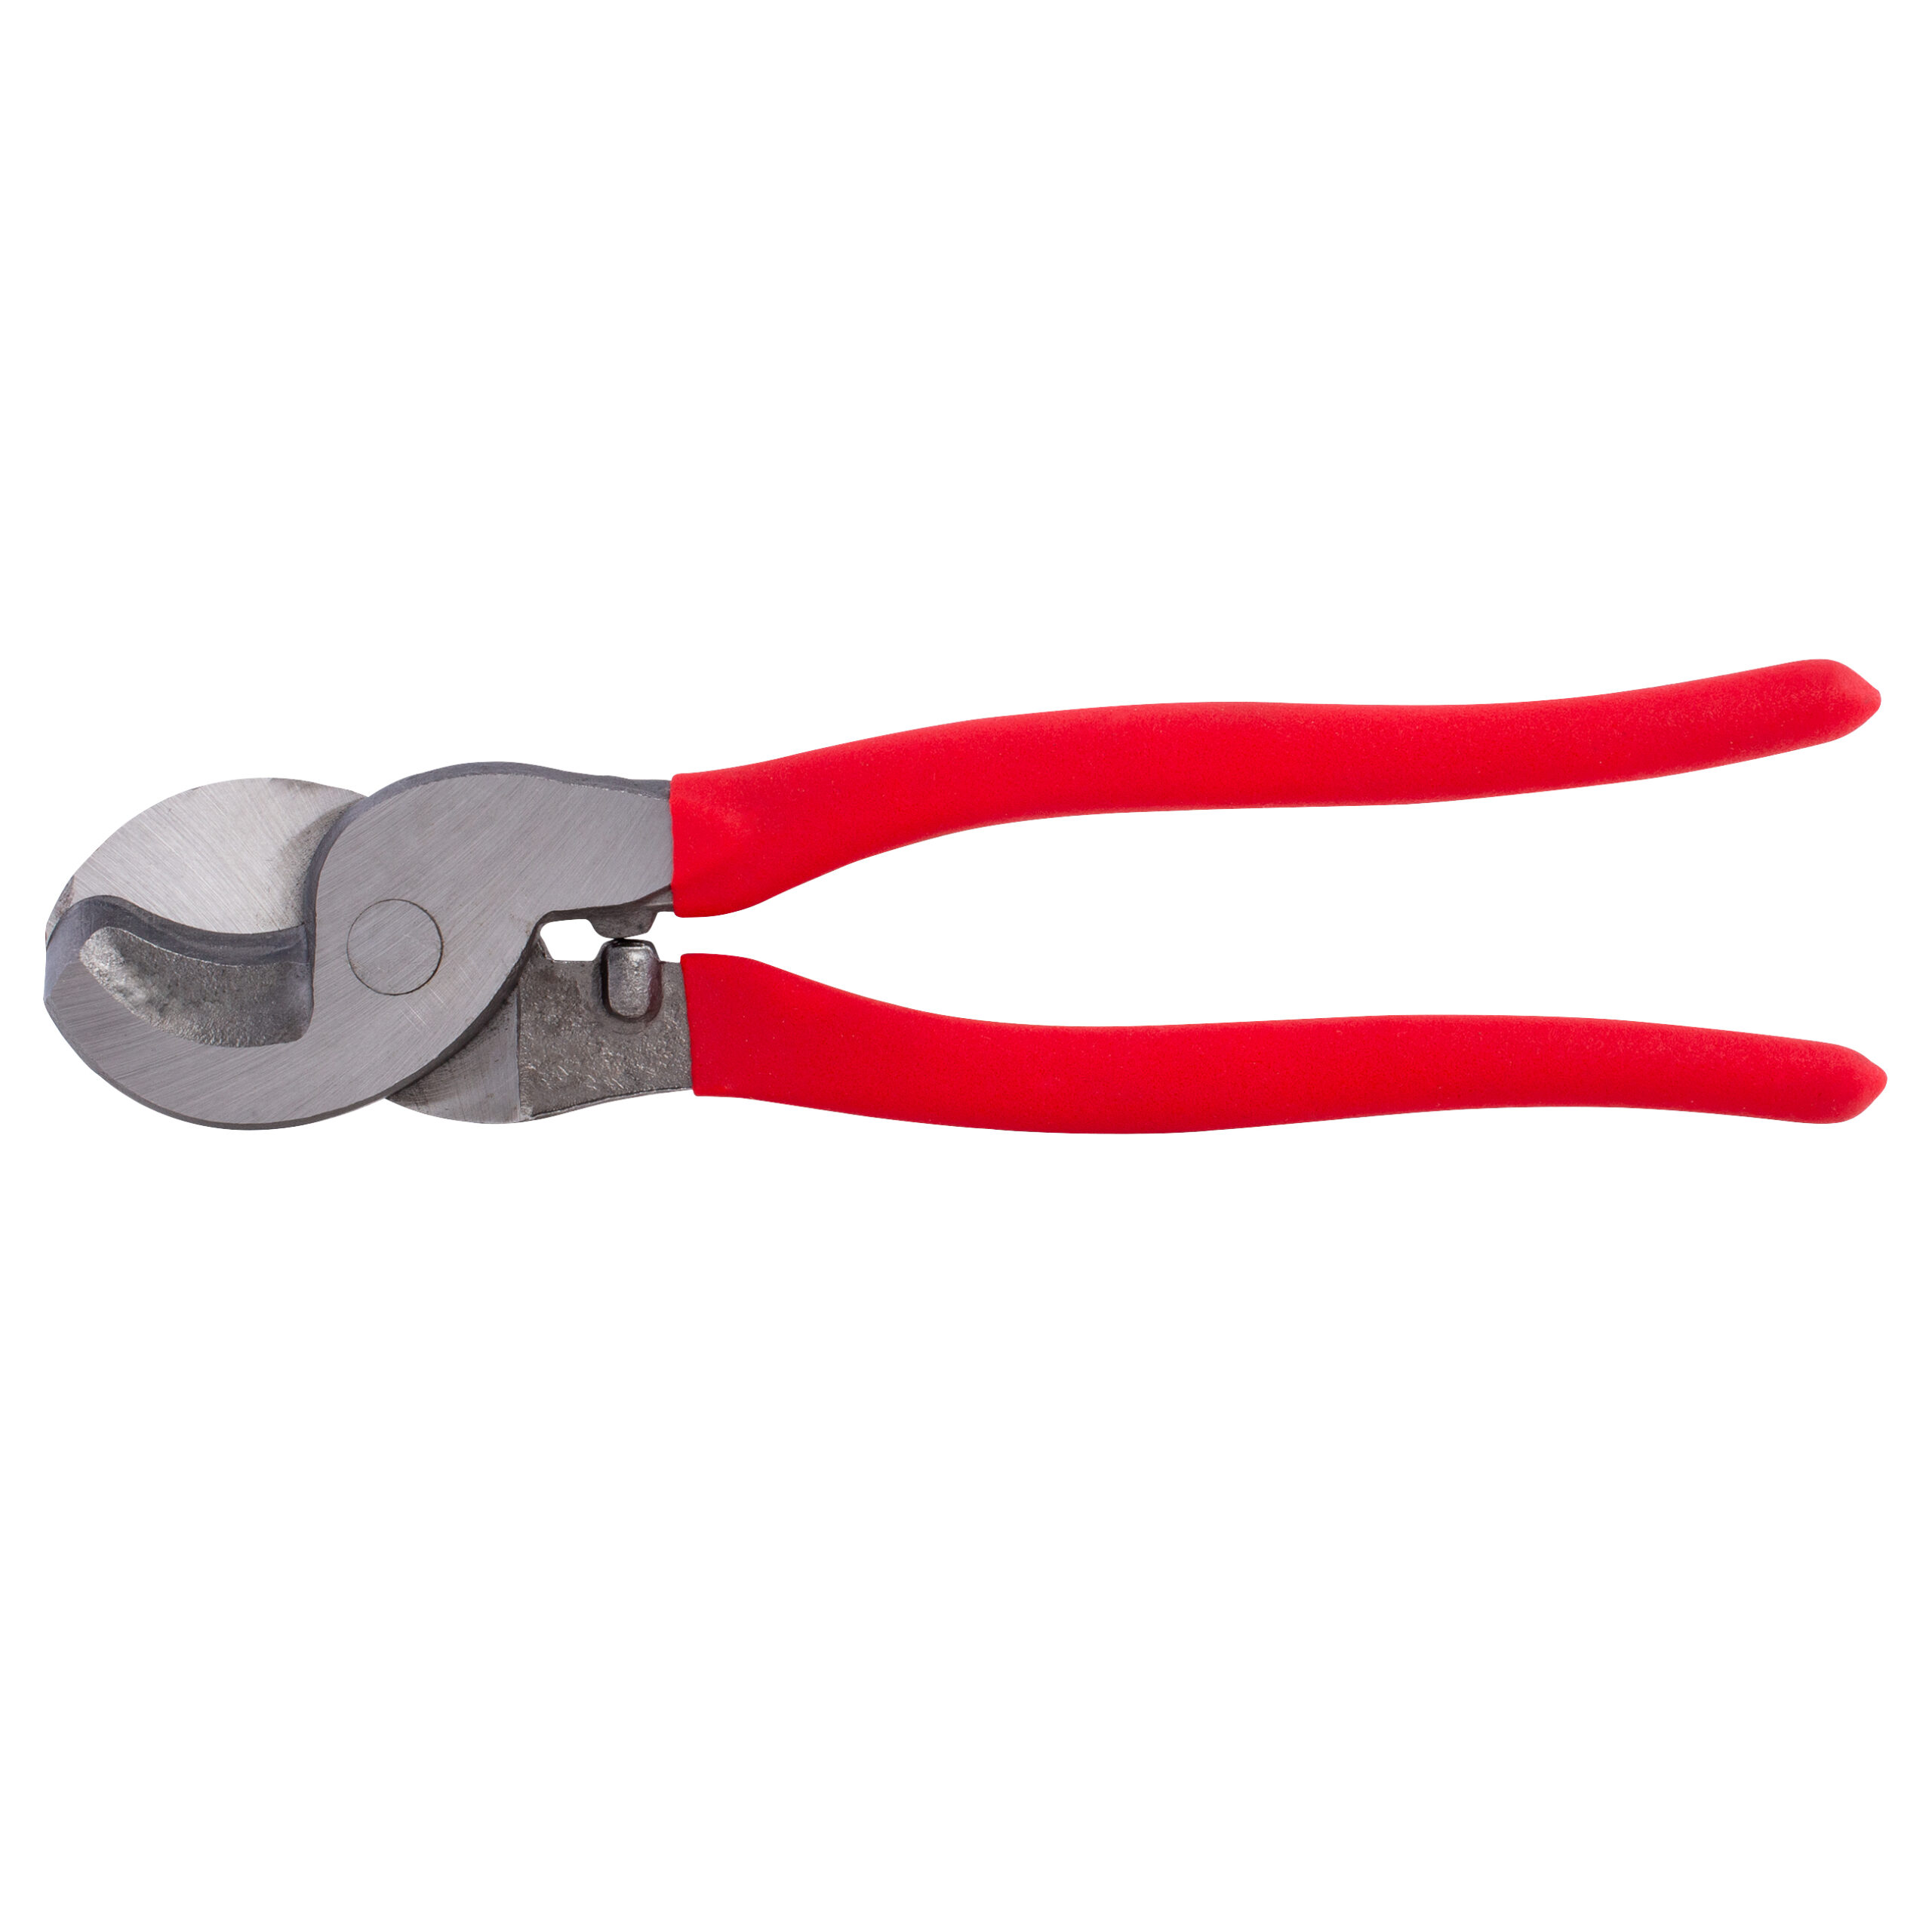 Unique Bargains Rubber Grip Metal Pliers Wire Cutter Cutting Tool New